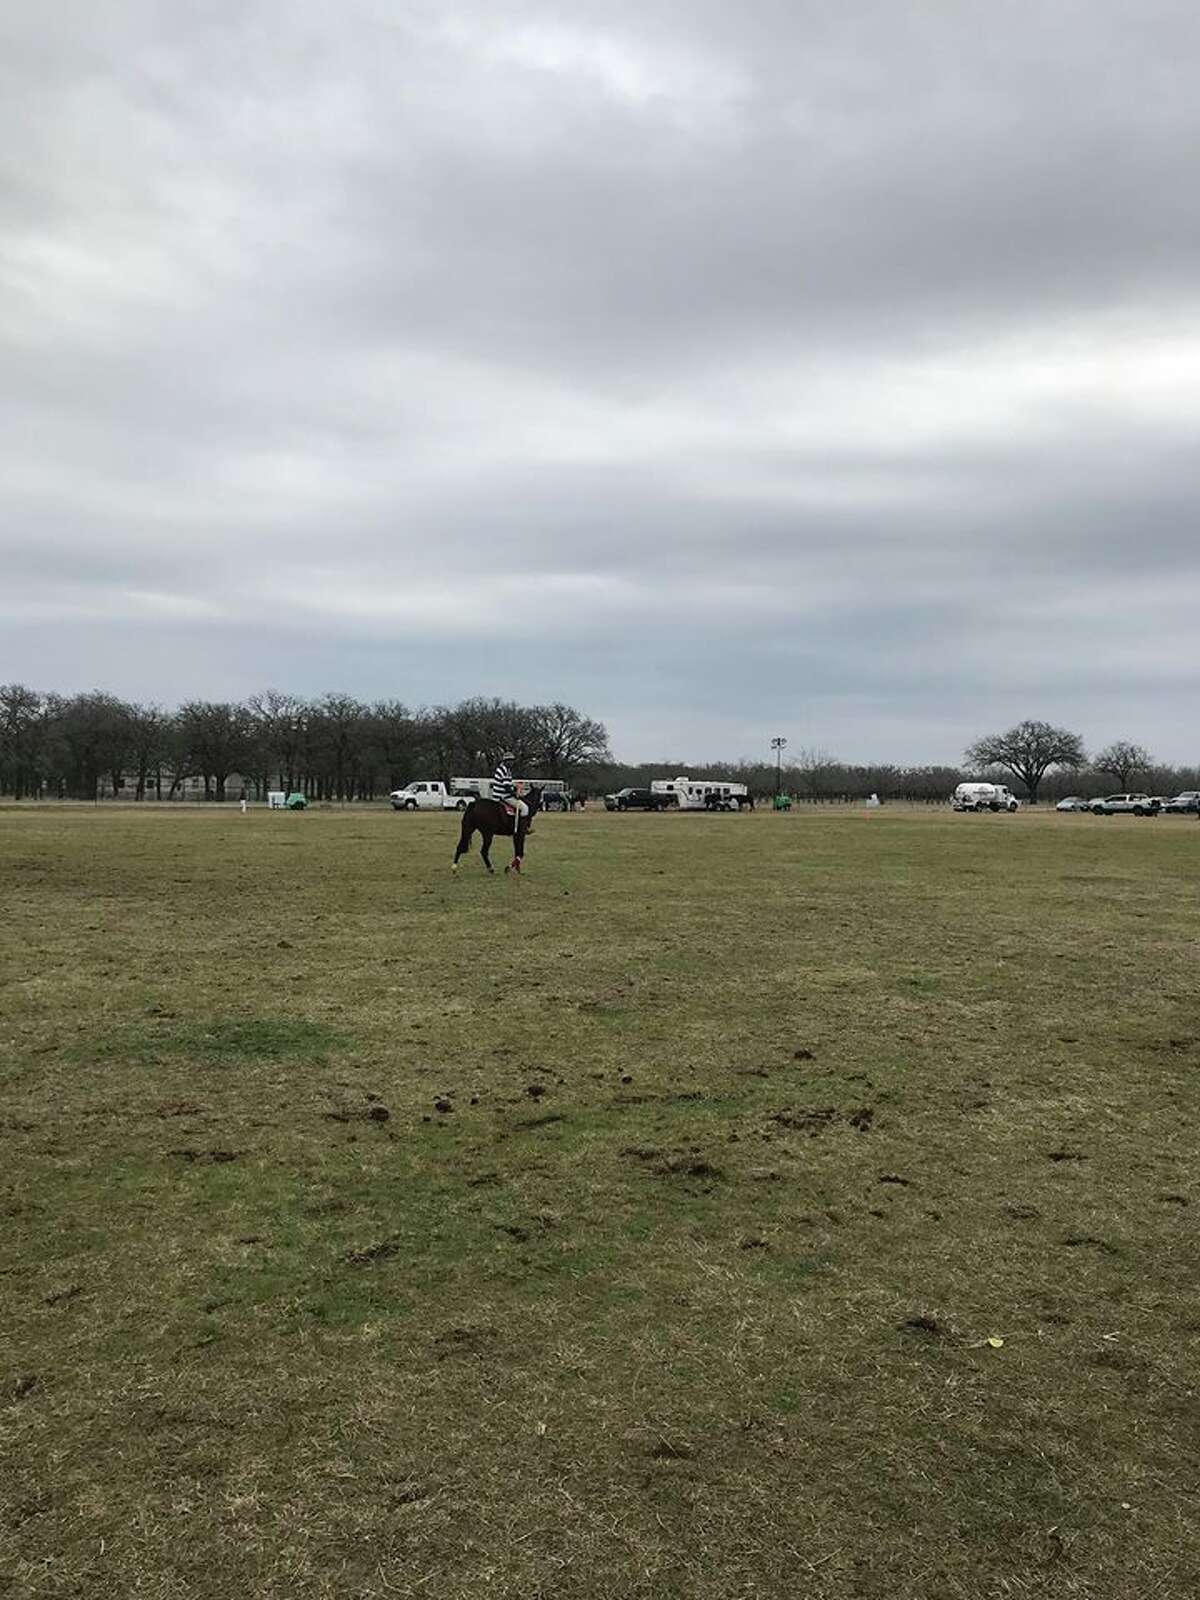 Pictures taken by Rodney Stane show the Fredericksburg Hot Air Balloon Festival and Polo Match on Dec. 29. Stane said he and others drove four hours from Fort Worth and found it to be "lackluster" and very different from what was advertised.